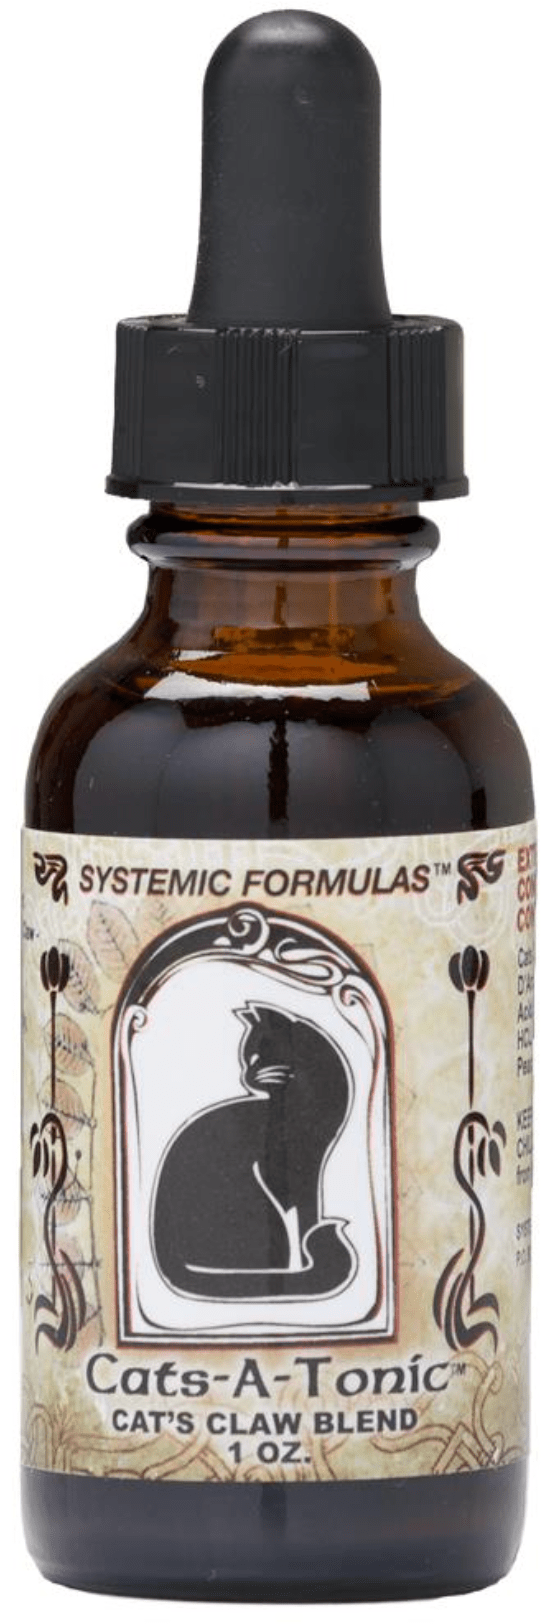 Systemic Formula Bio Extract: Cats-A-Tonic - NuVision Health Center